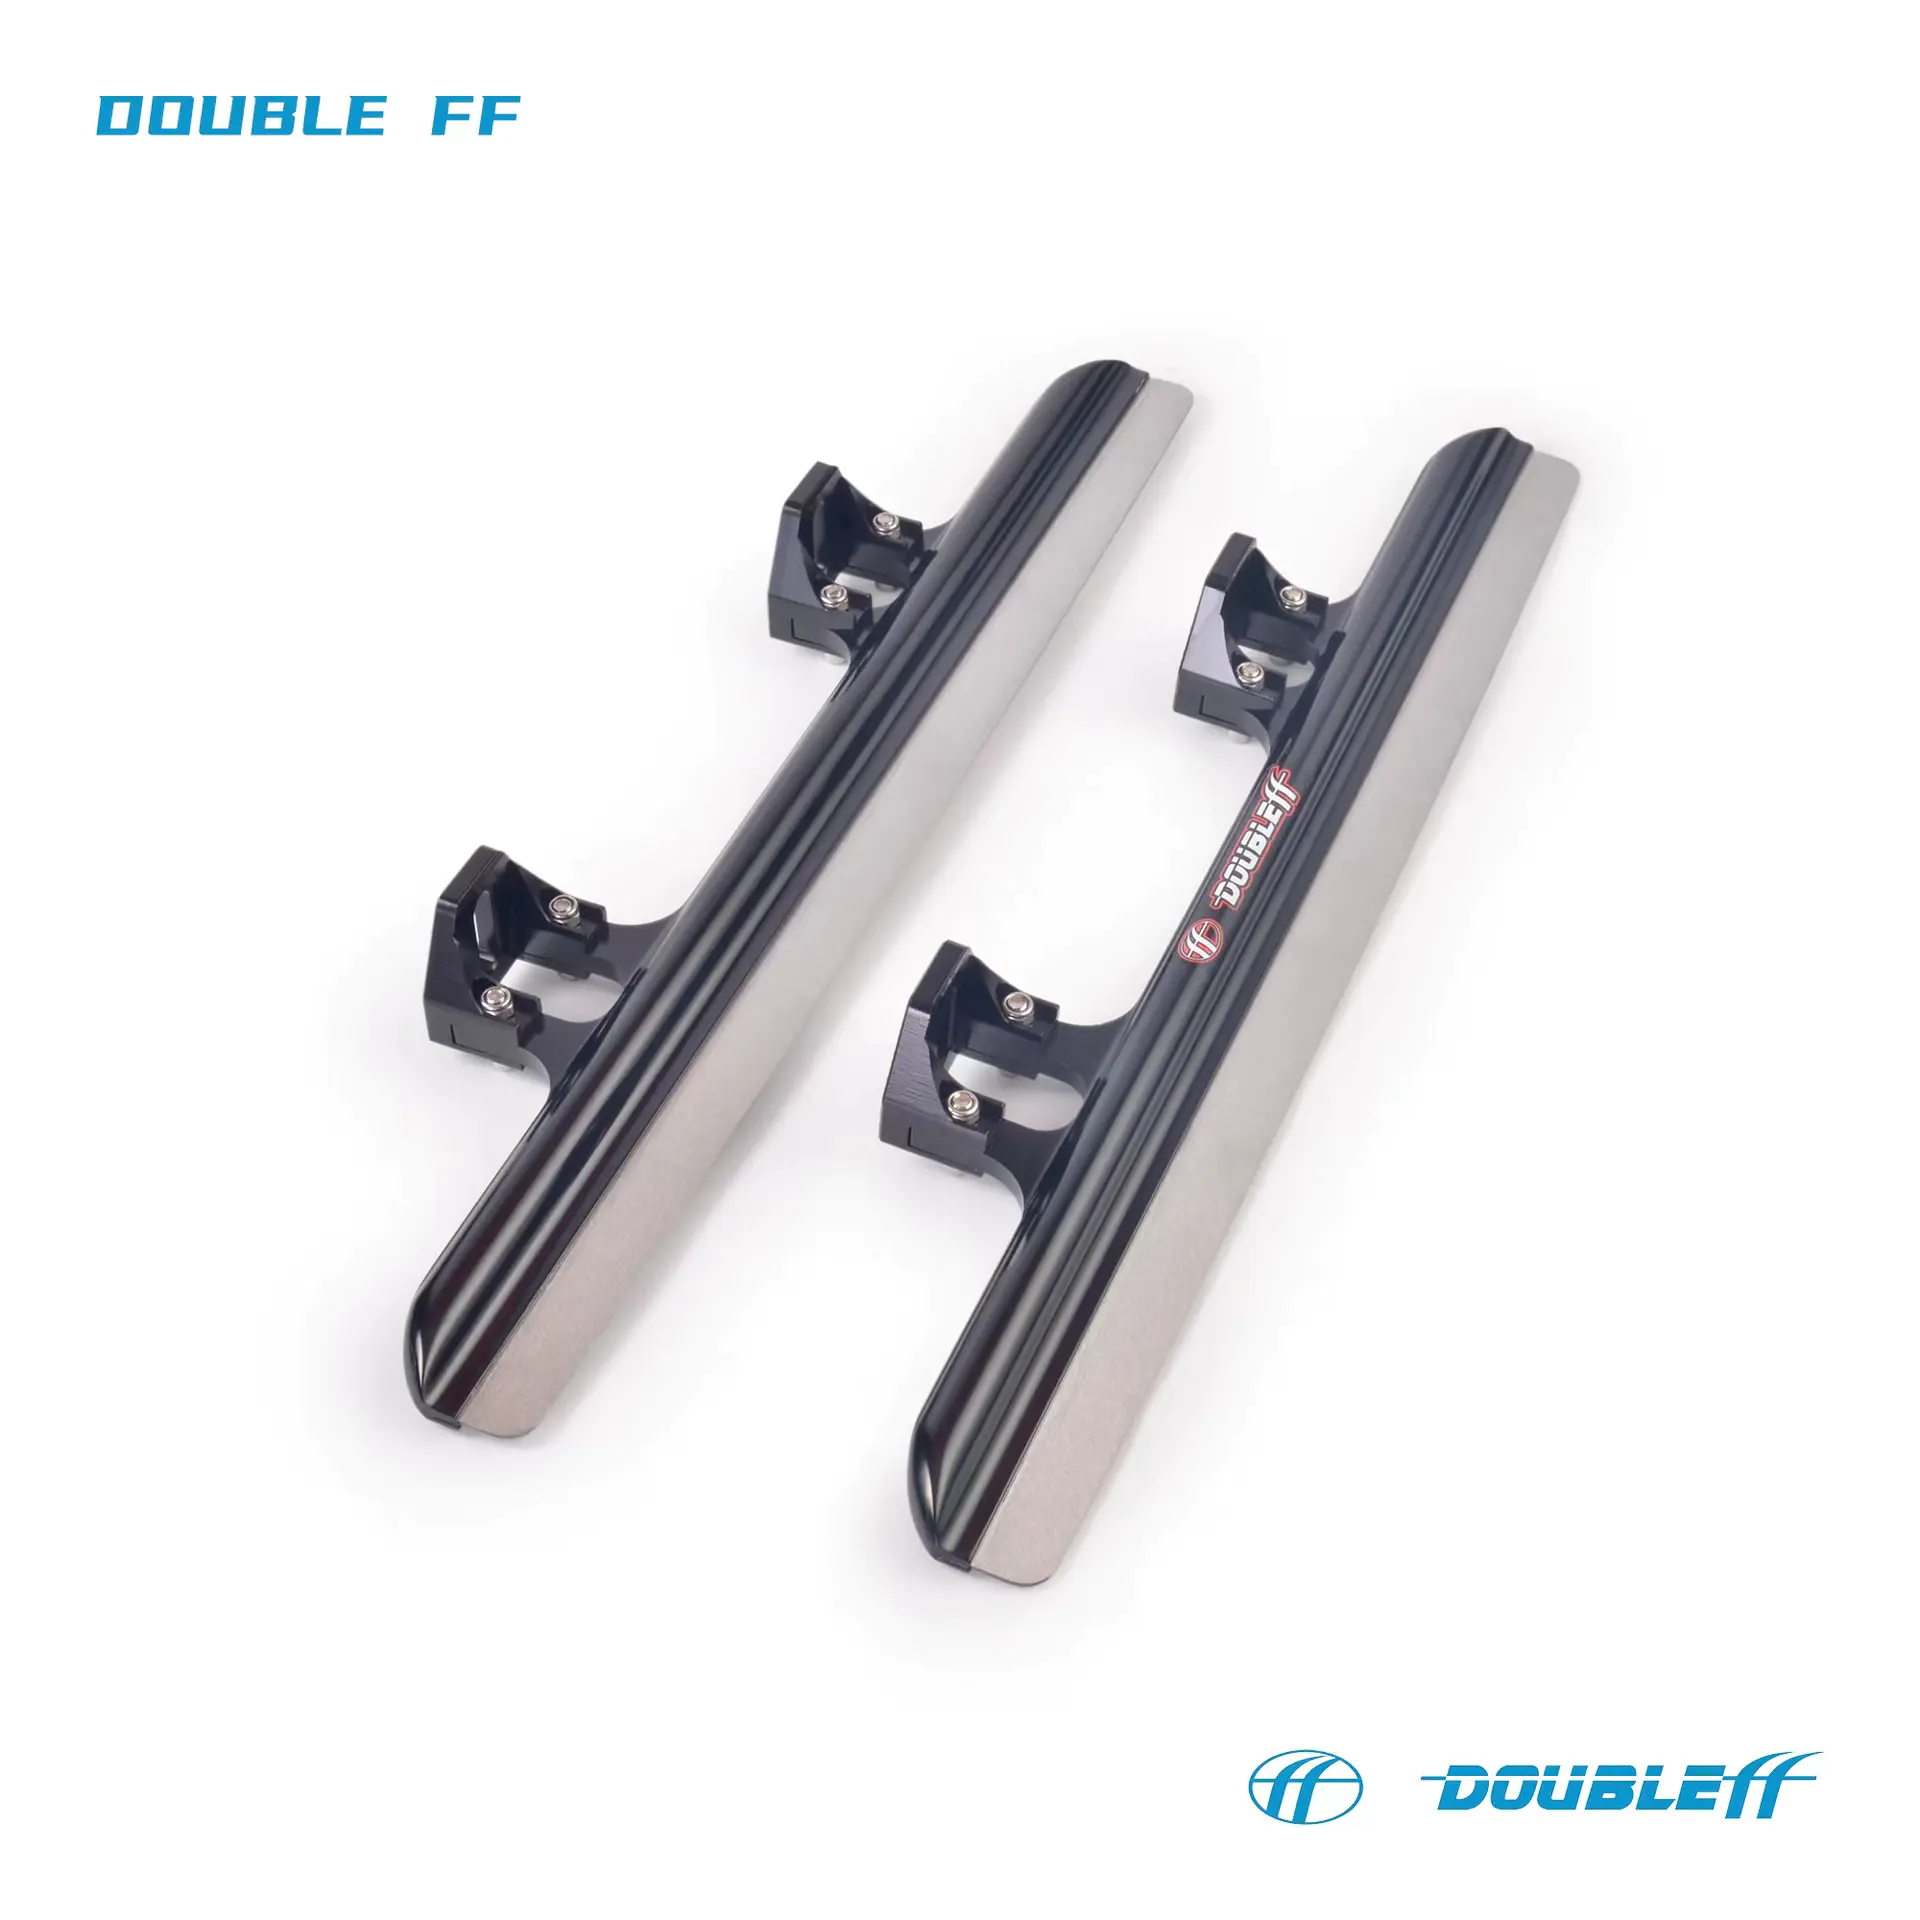 Double FF Professional Short Track Ice Skate Blades 64HRC CNC Aluminum 7005 Universal Ice Skate Blades For Teens Or Adluts-Black